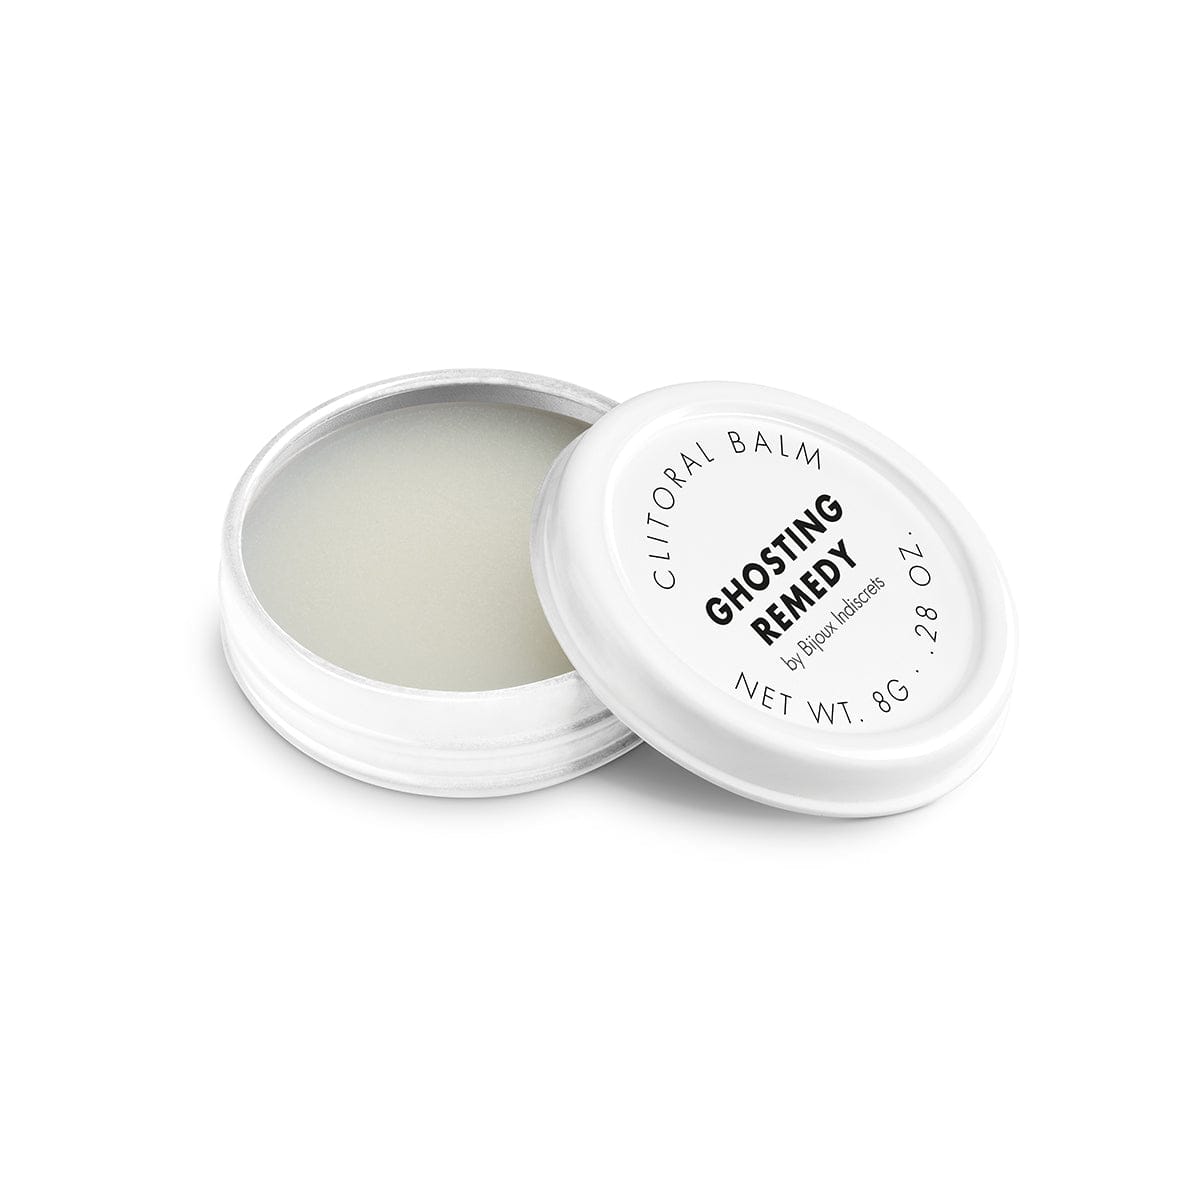 Bijoux Indiscrets Clitherapy Ghosting Remedy Clitoral Balm - Rolik®